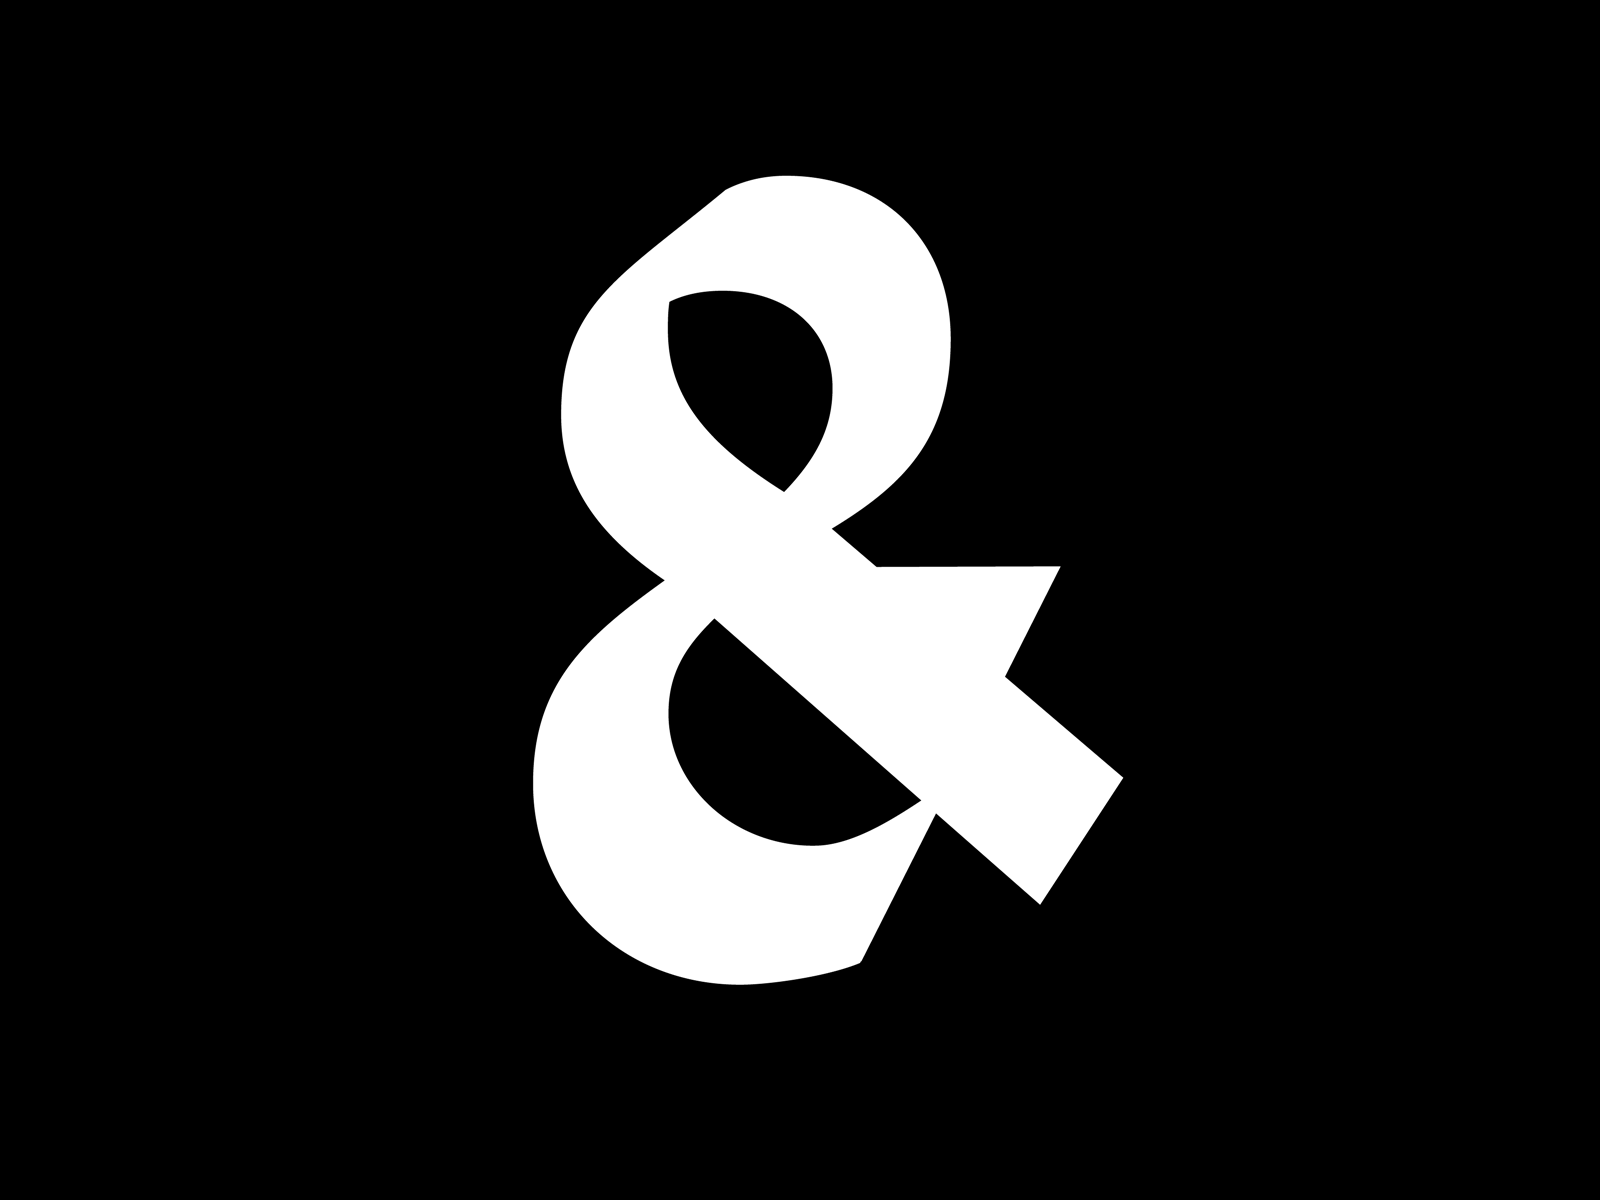 Eves & Sons Barbers Ampersand Mark